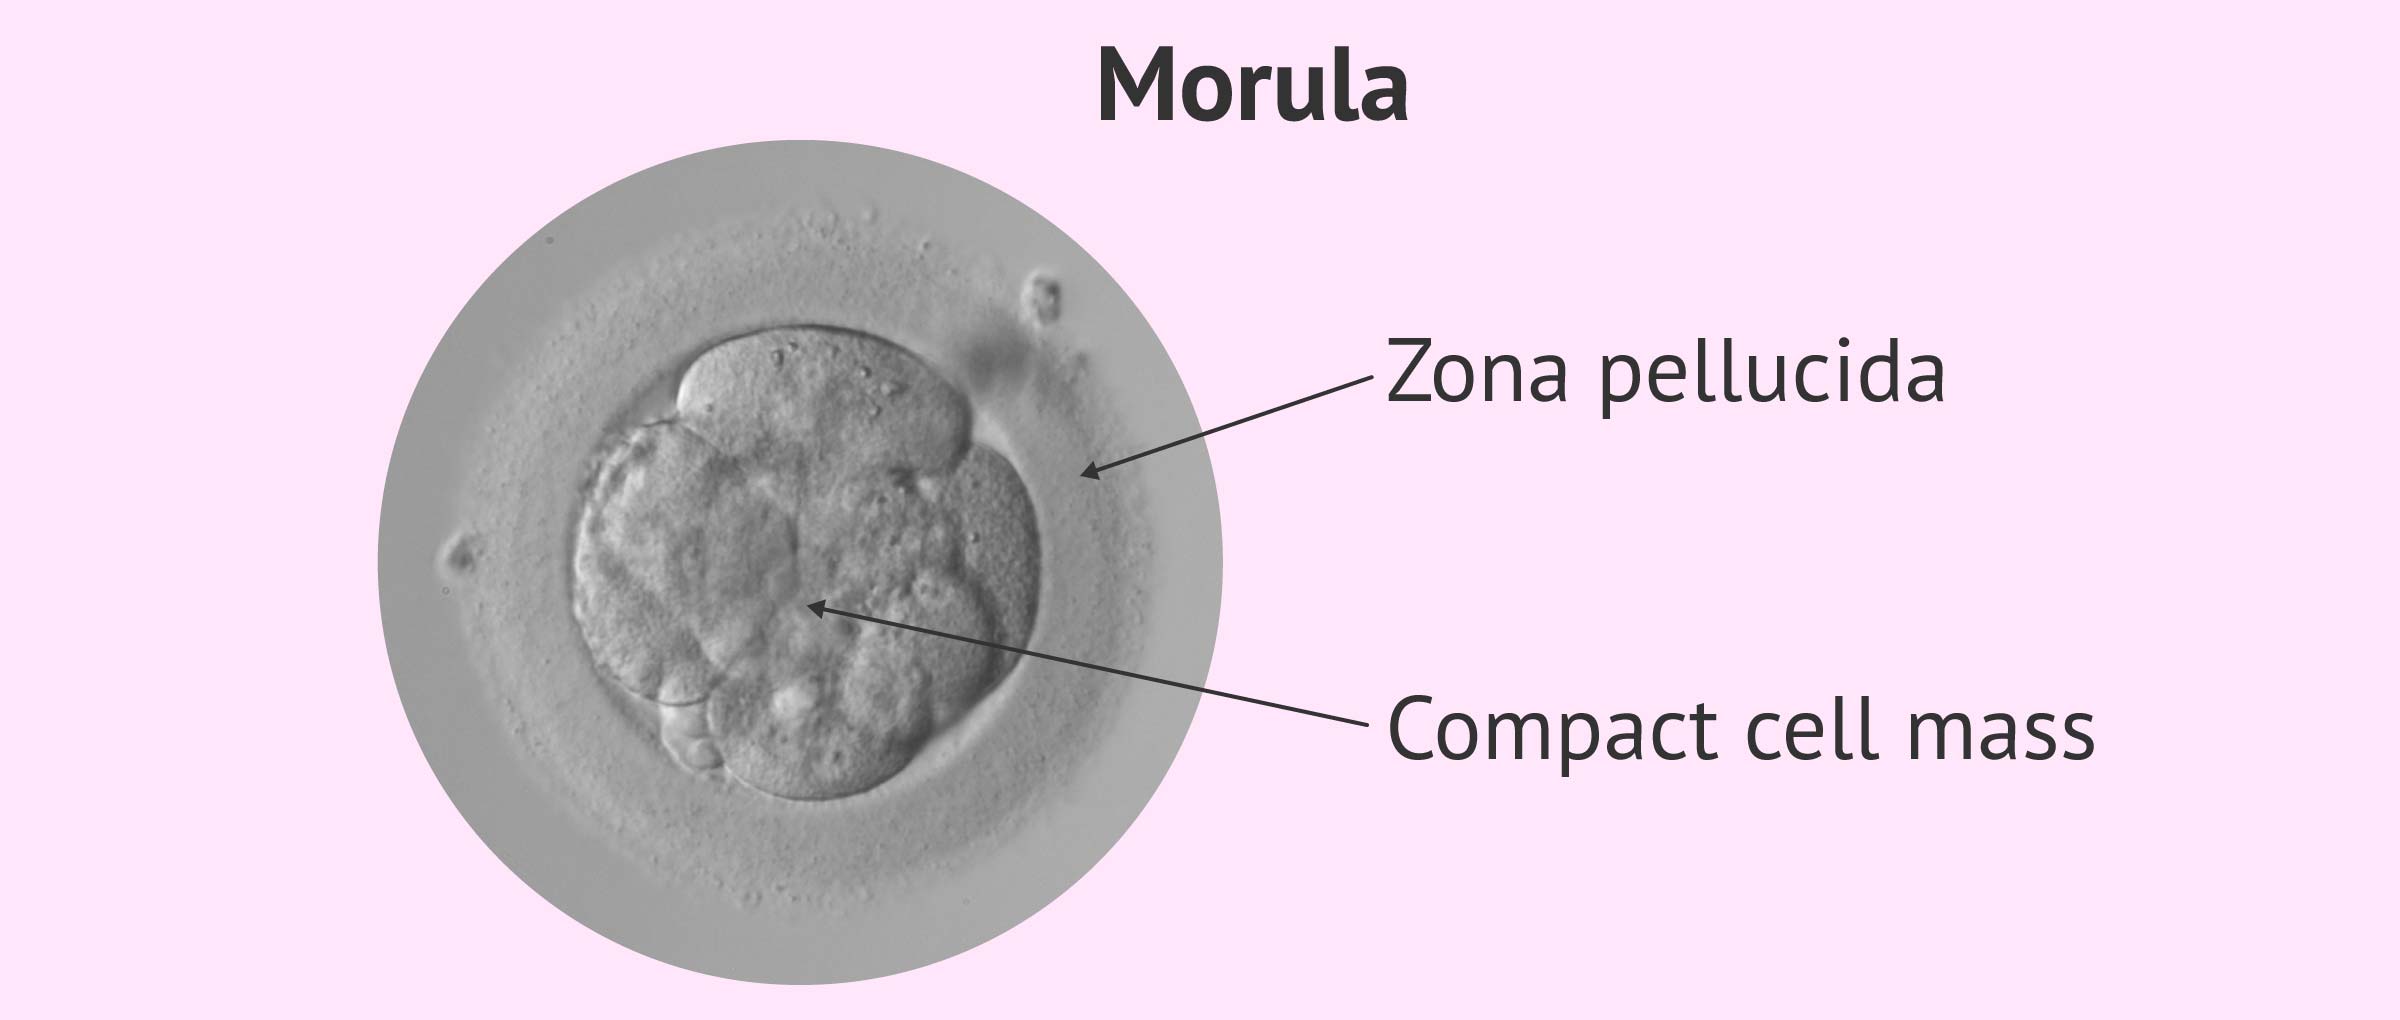 Structure of a compact morula